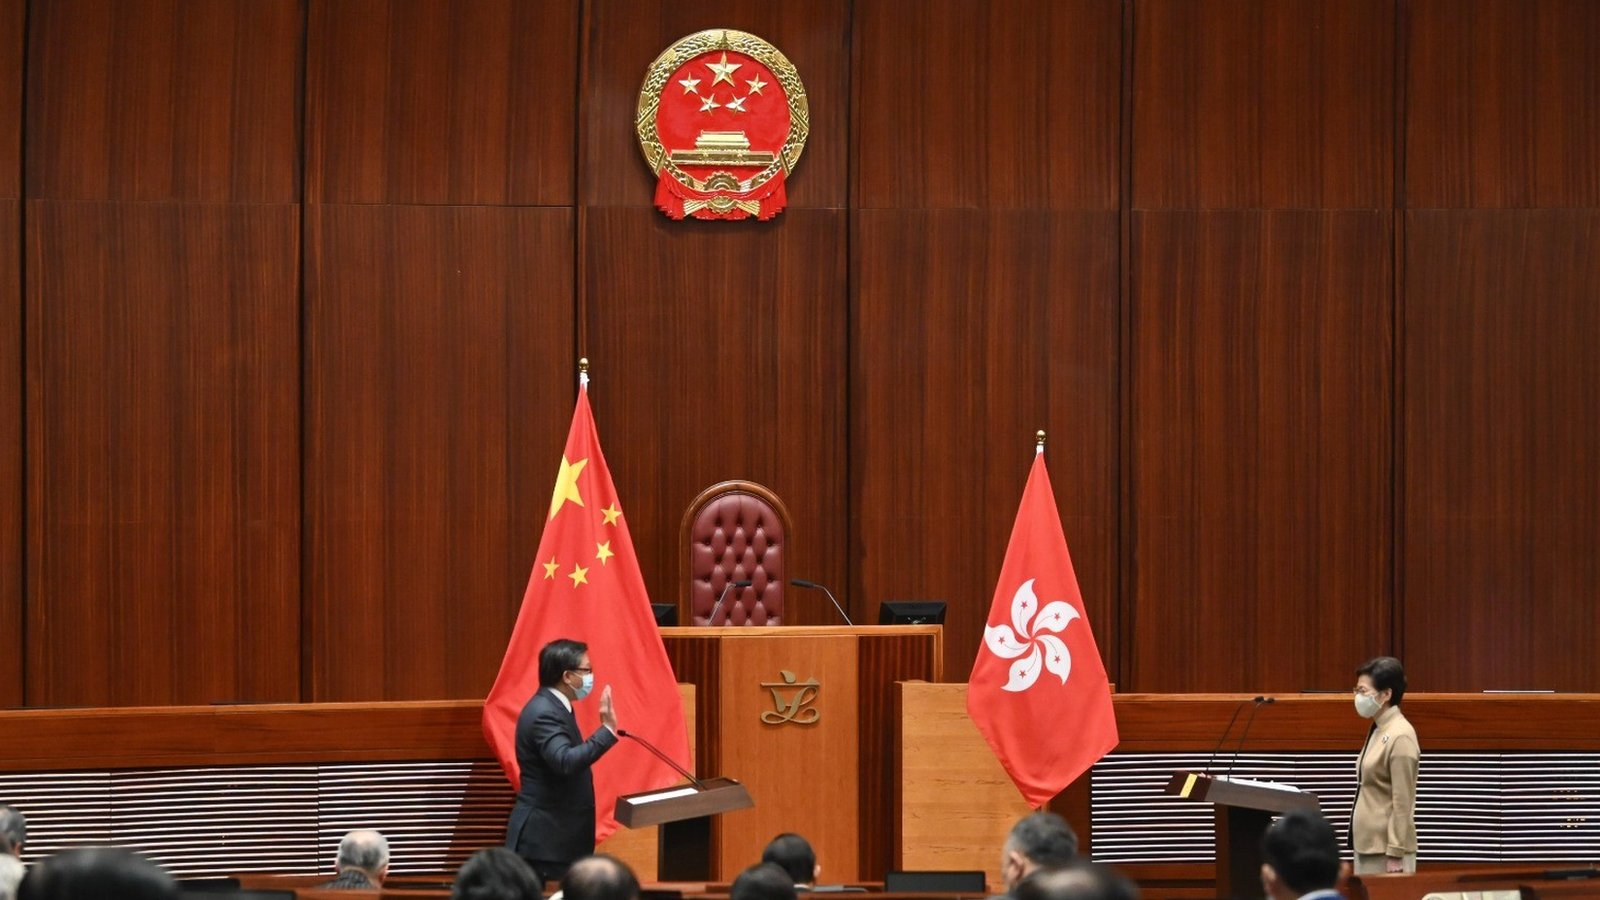 Hong Kong Chief Executive Carrie Lam listens as a member of the seventh-term Legislative Council (LegCo) takes an oath in the Chamber of the LegCo Complex on January 3, 2022 in Hong Kong, China